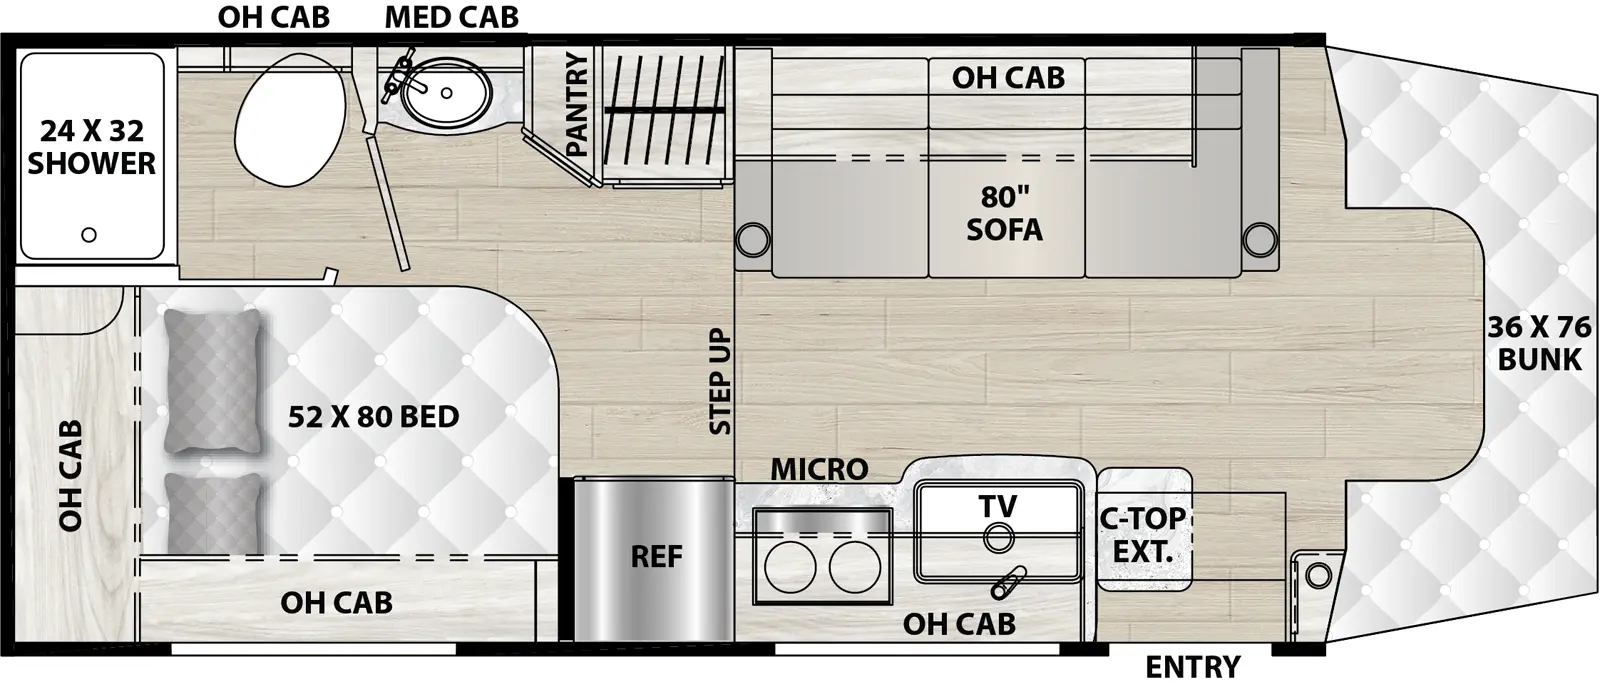 The 24FL has zero slideouts and one entry. Exterior features an outside TV. Interior layout front to back: bunk over cab, off-door side sofa bed with overhead cabinet, and pantry/wardrobe; door side entry with TV above, kitchen counter with sink, countertop extension, overhead cabinet, induction cooktop, and refrigerator; rear off-door side bathroom sink and room with toilet, shower and medicine cabinet; rear door side full bed with overhead cabinets.